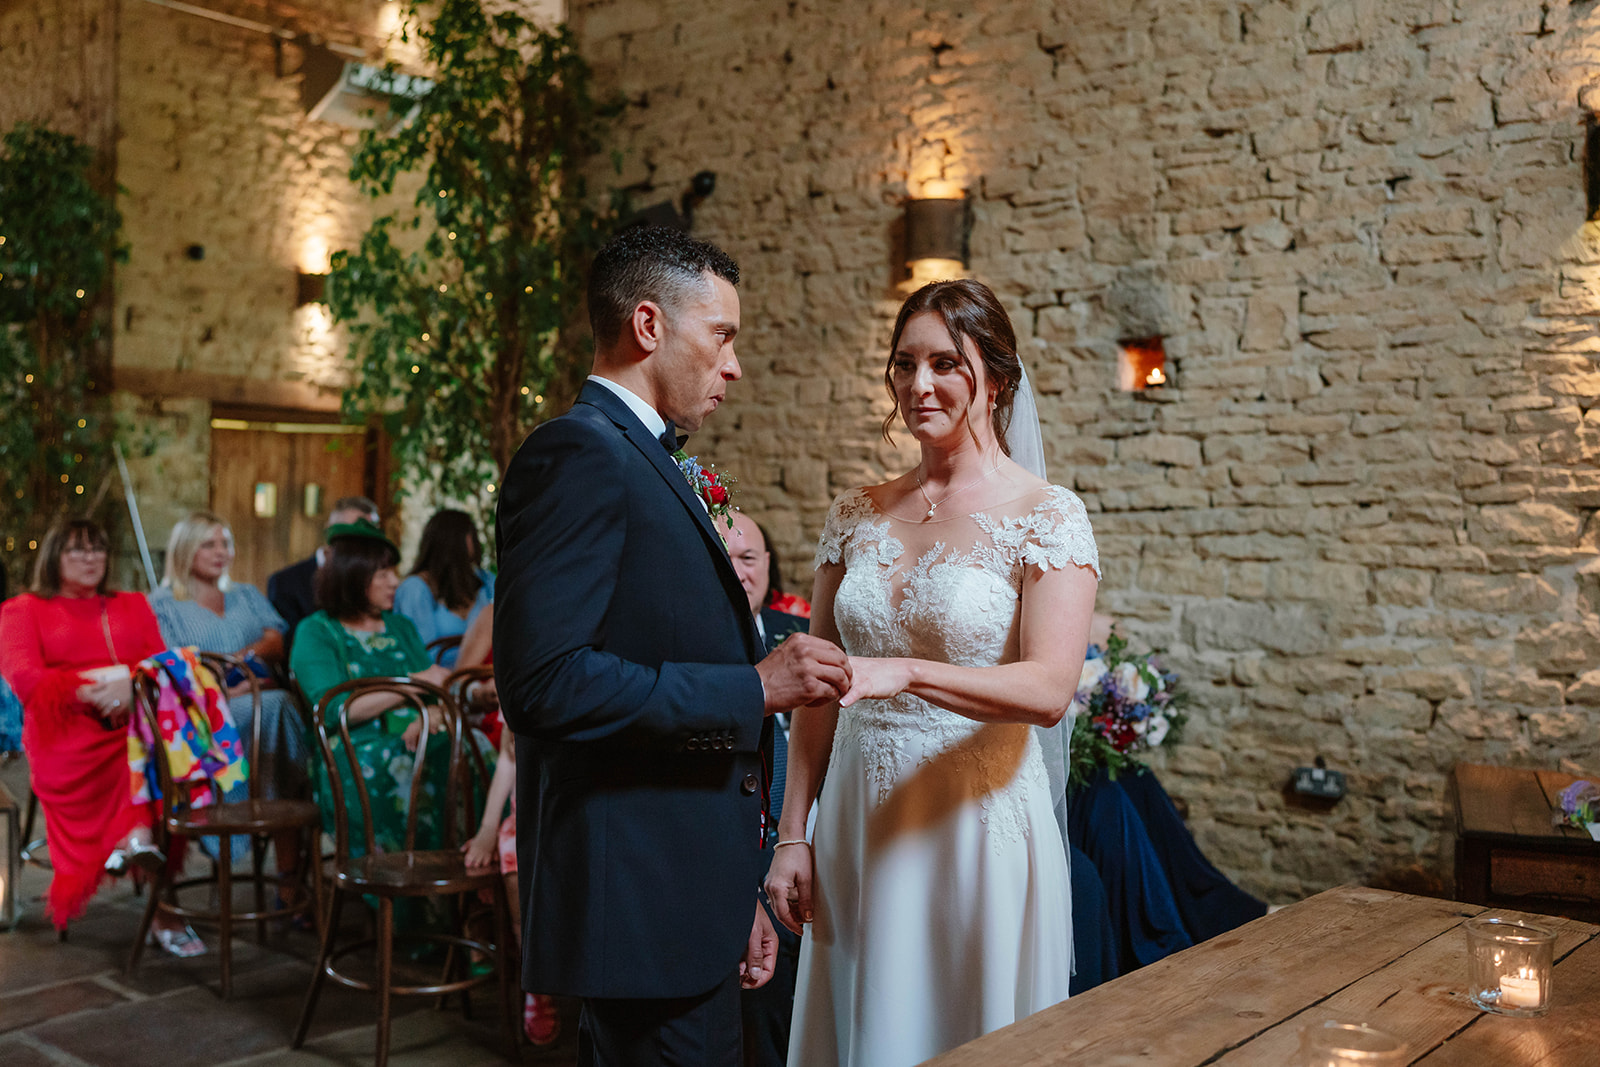 Ring exchange during ceremony at Cripps Barn